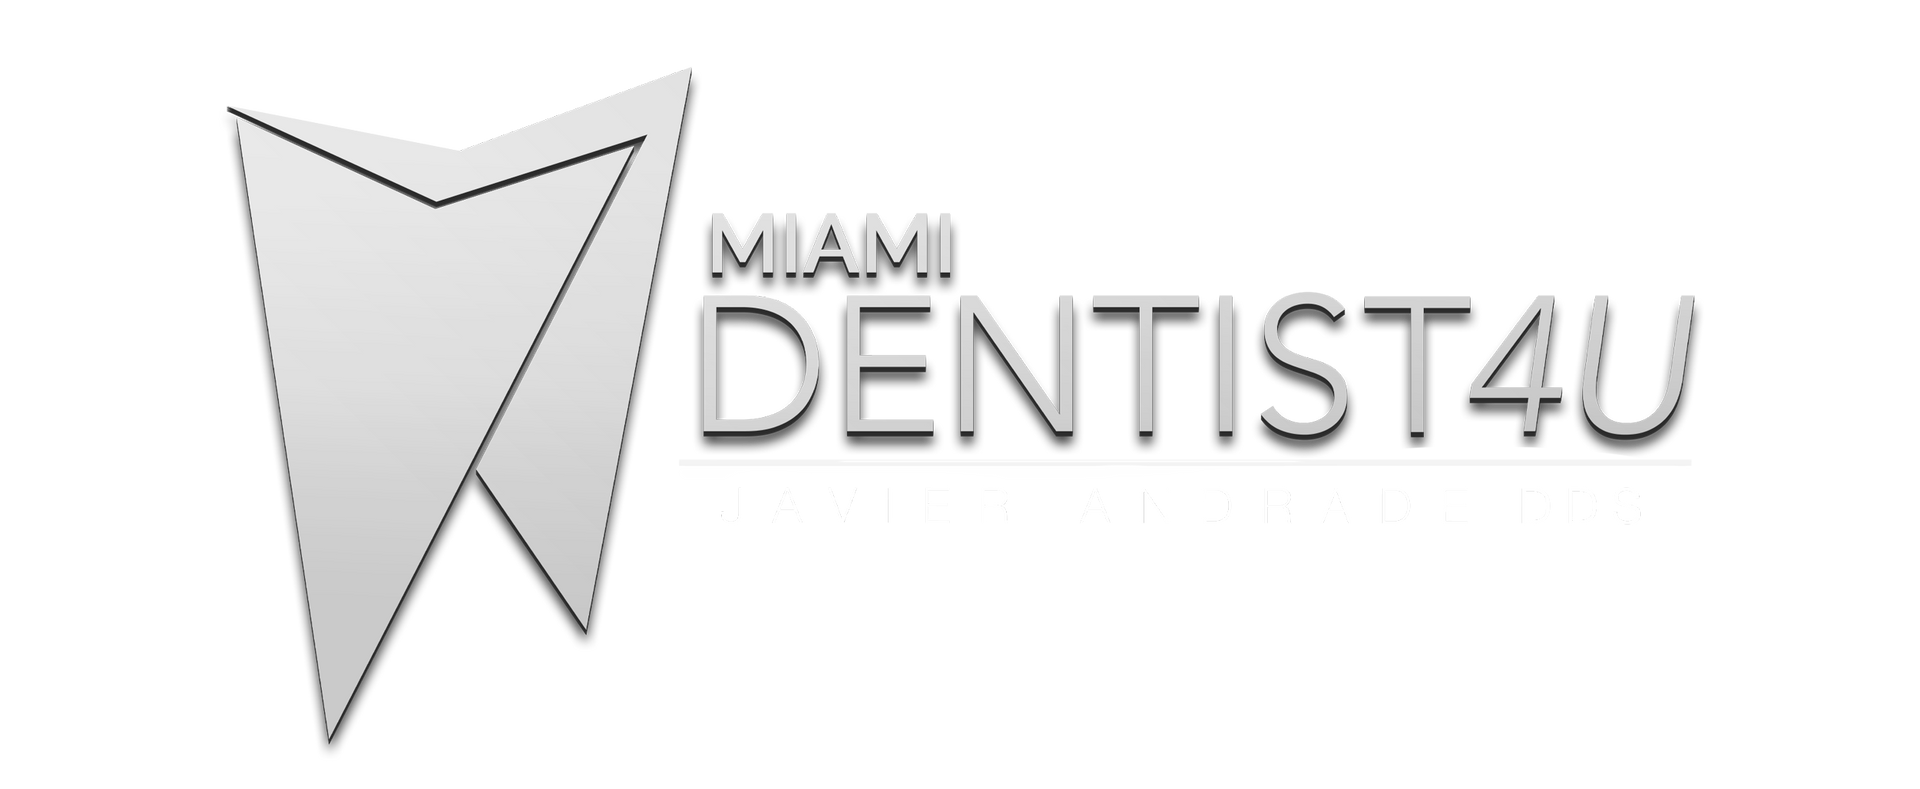 A logo for miami dentist4u with a tooth on it